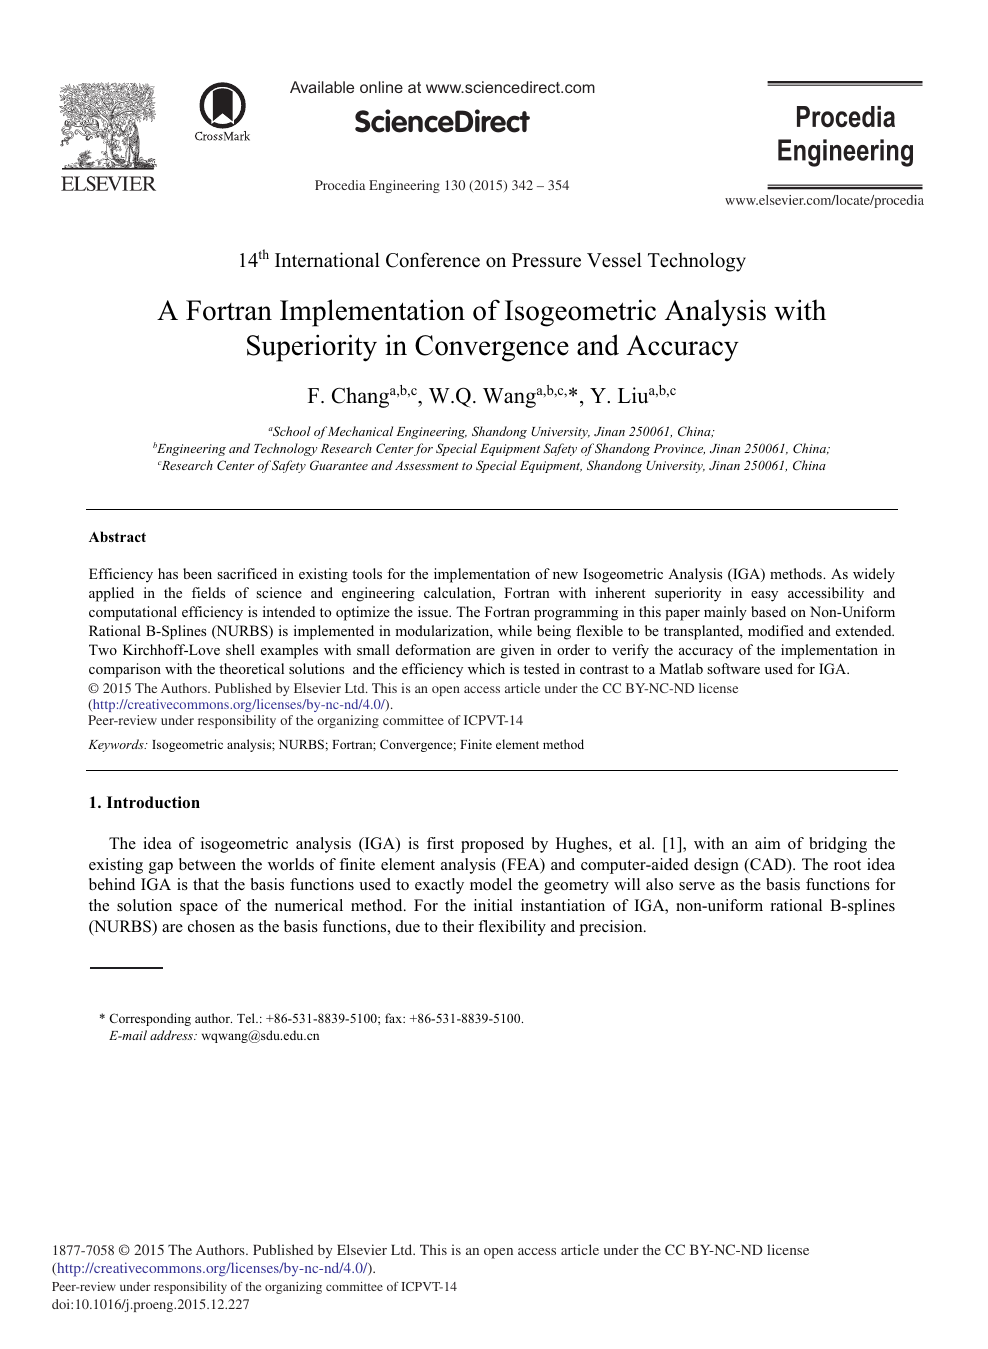 A Fortran Implementation Of Isogeometric Analysis With Superiority In Convergence And Accuracy Topic Of Research Paper In Materials Engineering Download Scholarly Article Pdf And Read For Free On Cyberleninka Open Science